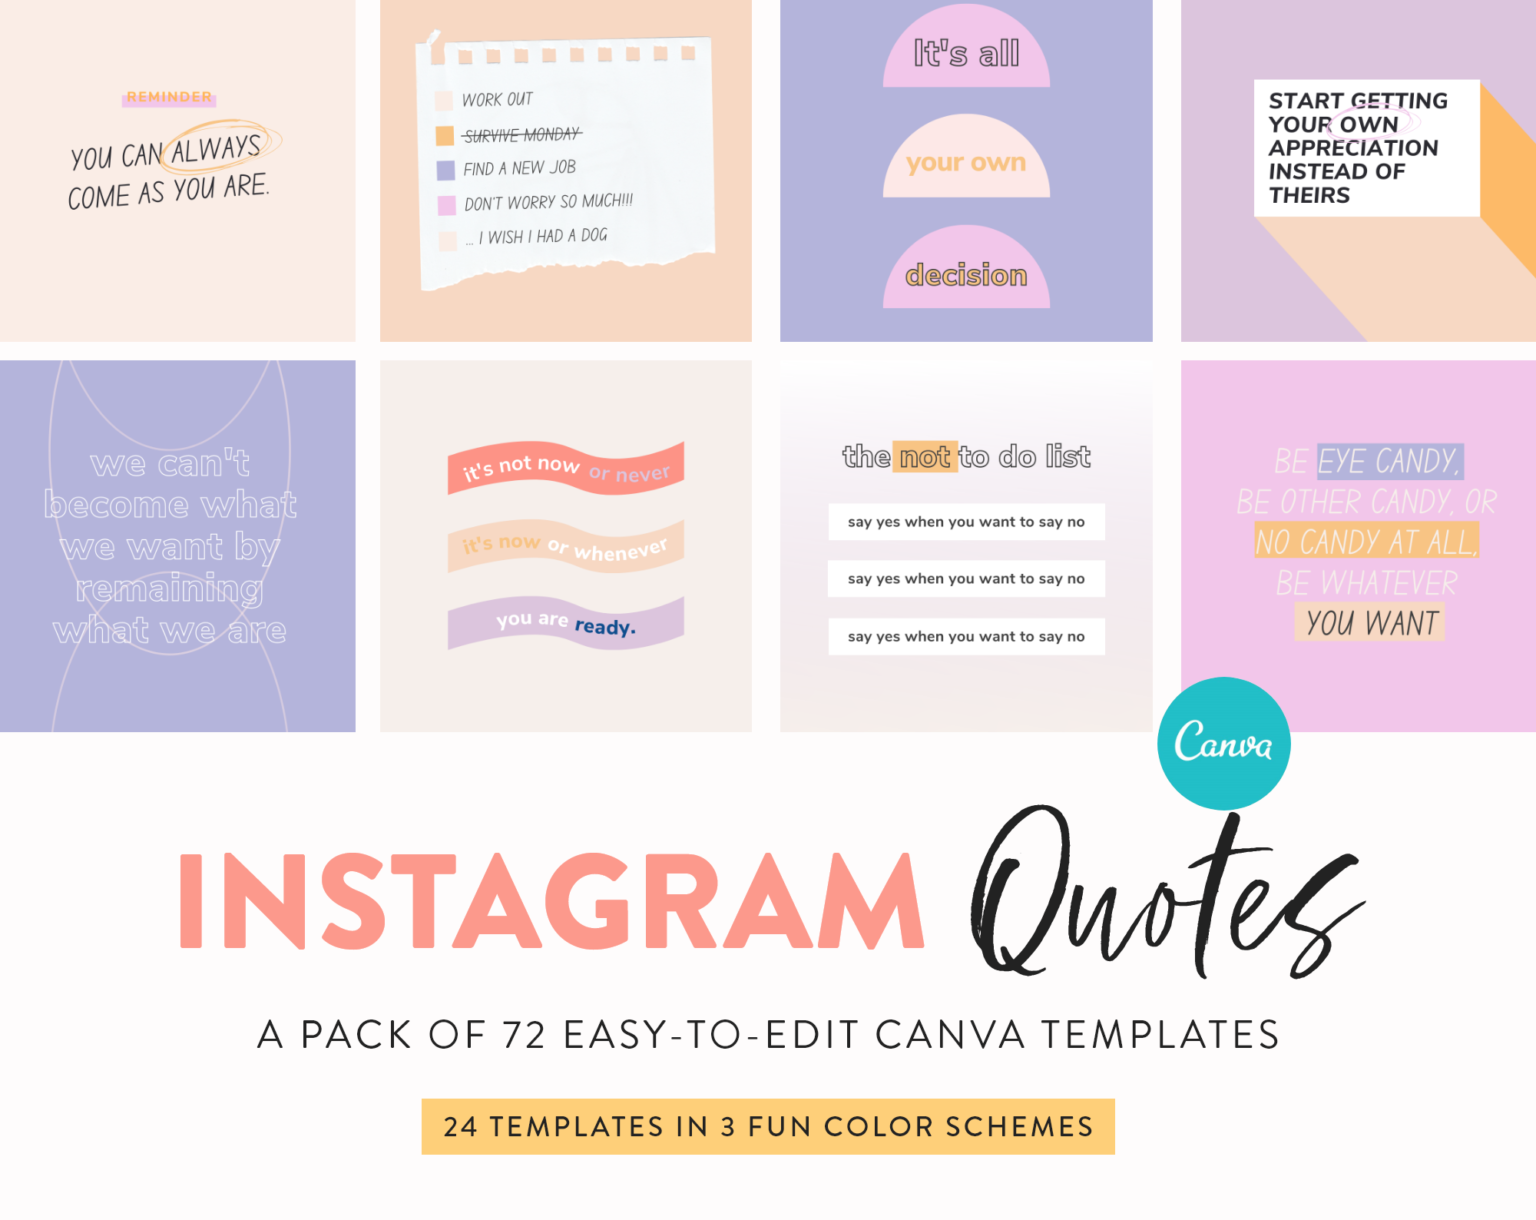 modern-quotes-Instagram-posts-pack-for-canva-whats-inside